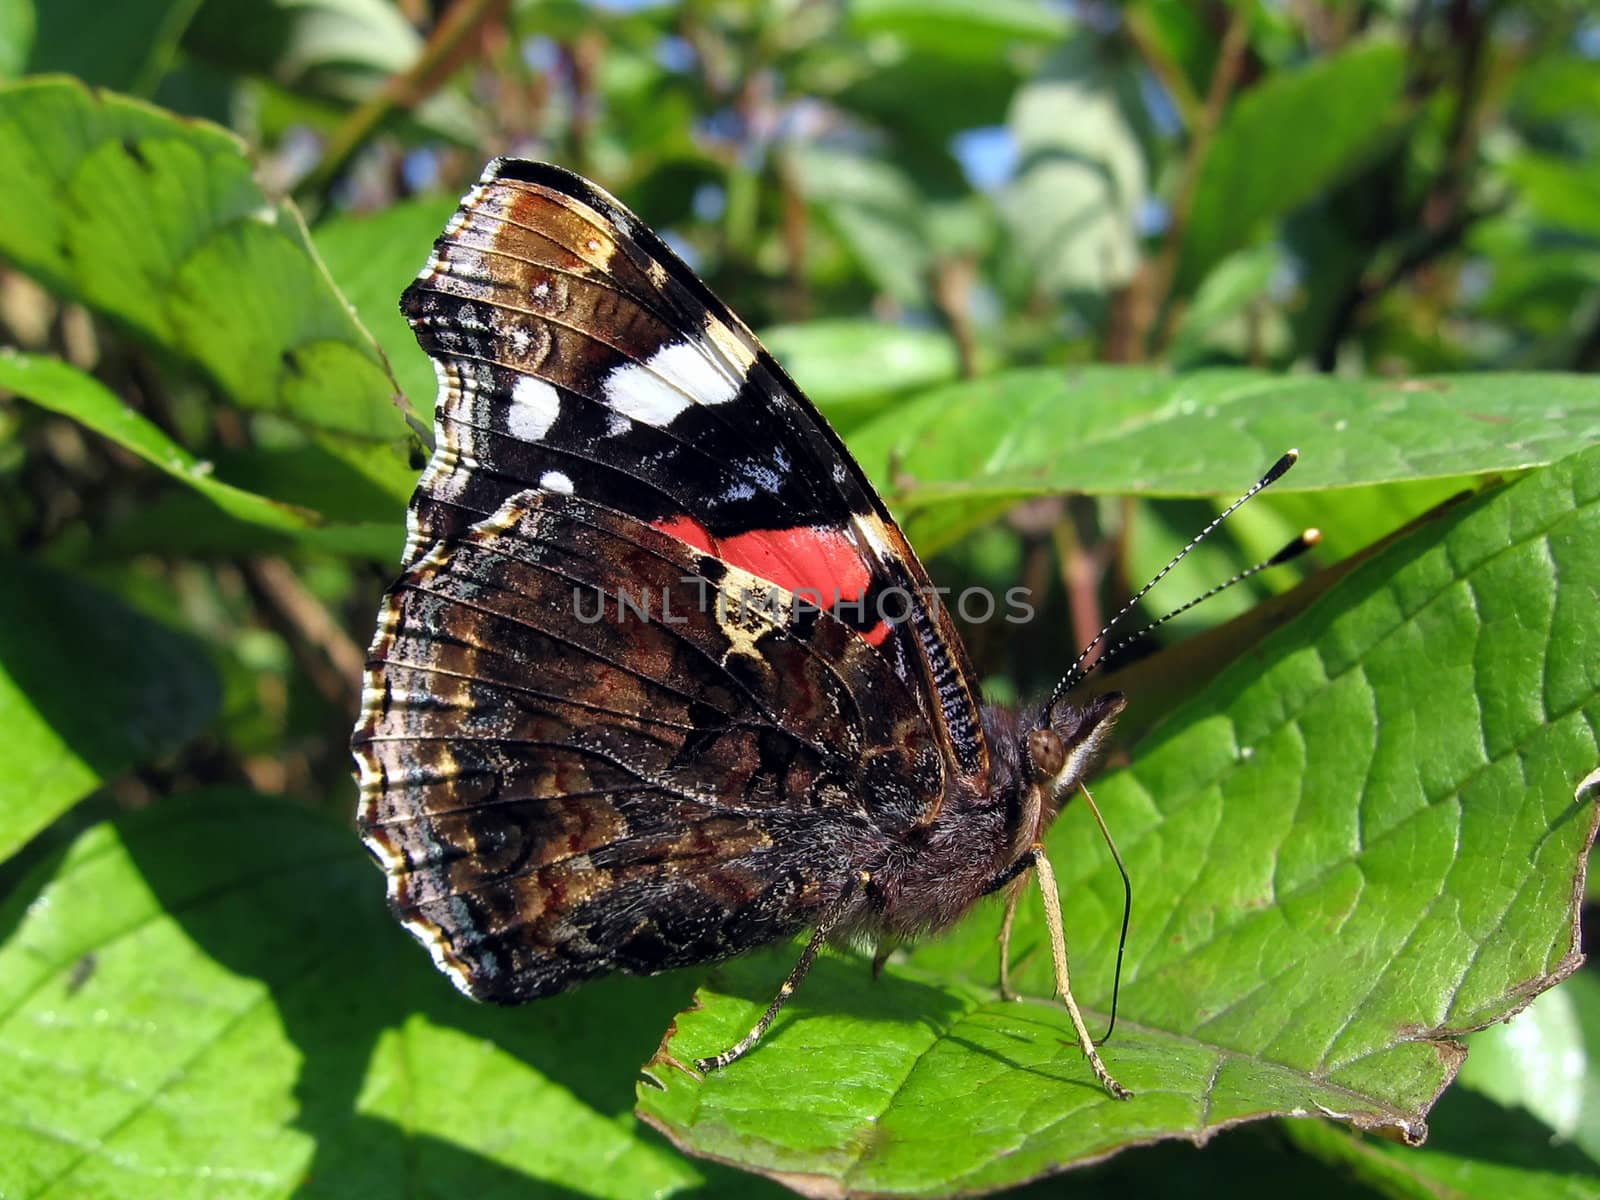 Admiral butterfly on the leaf by tomatto